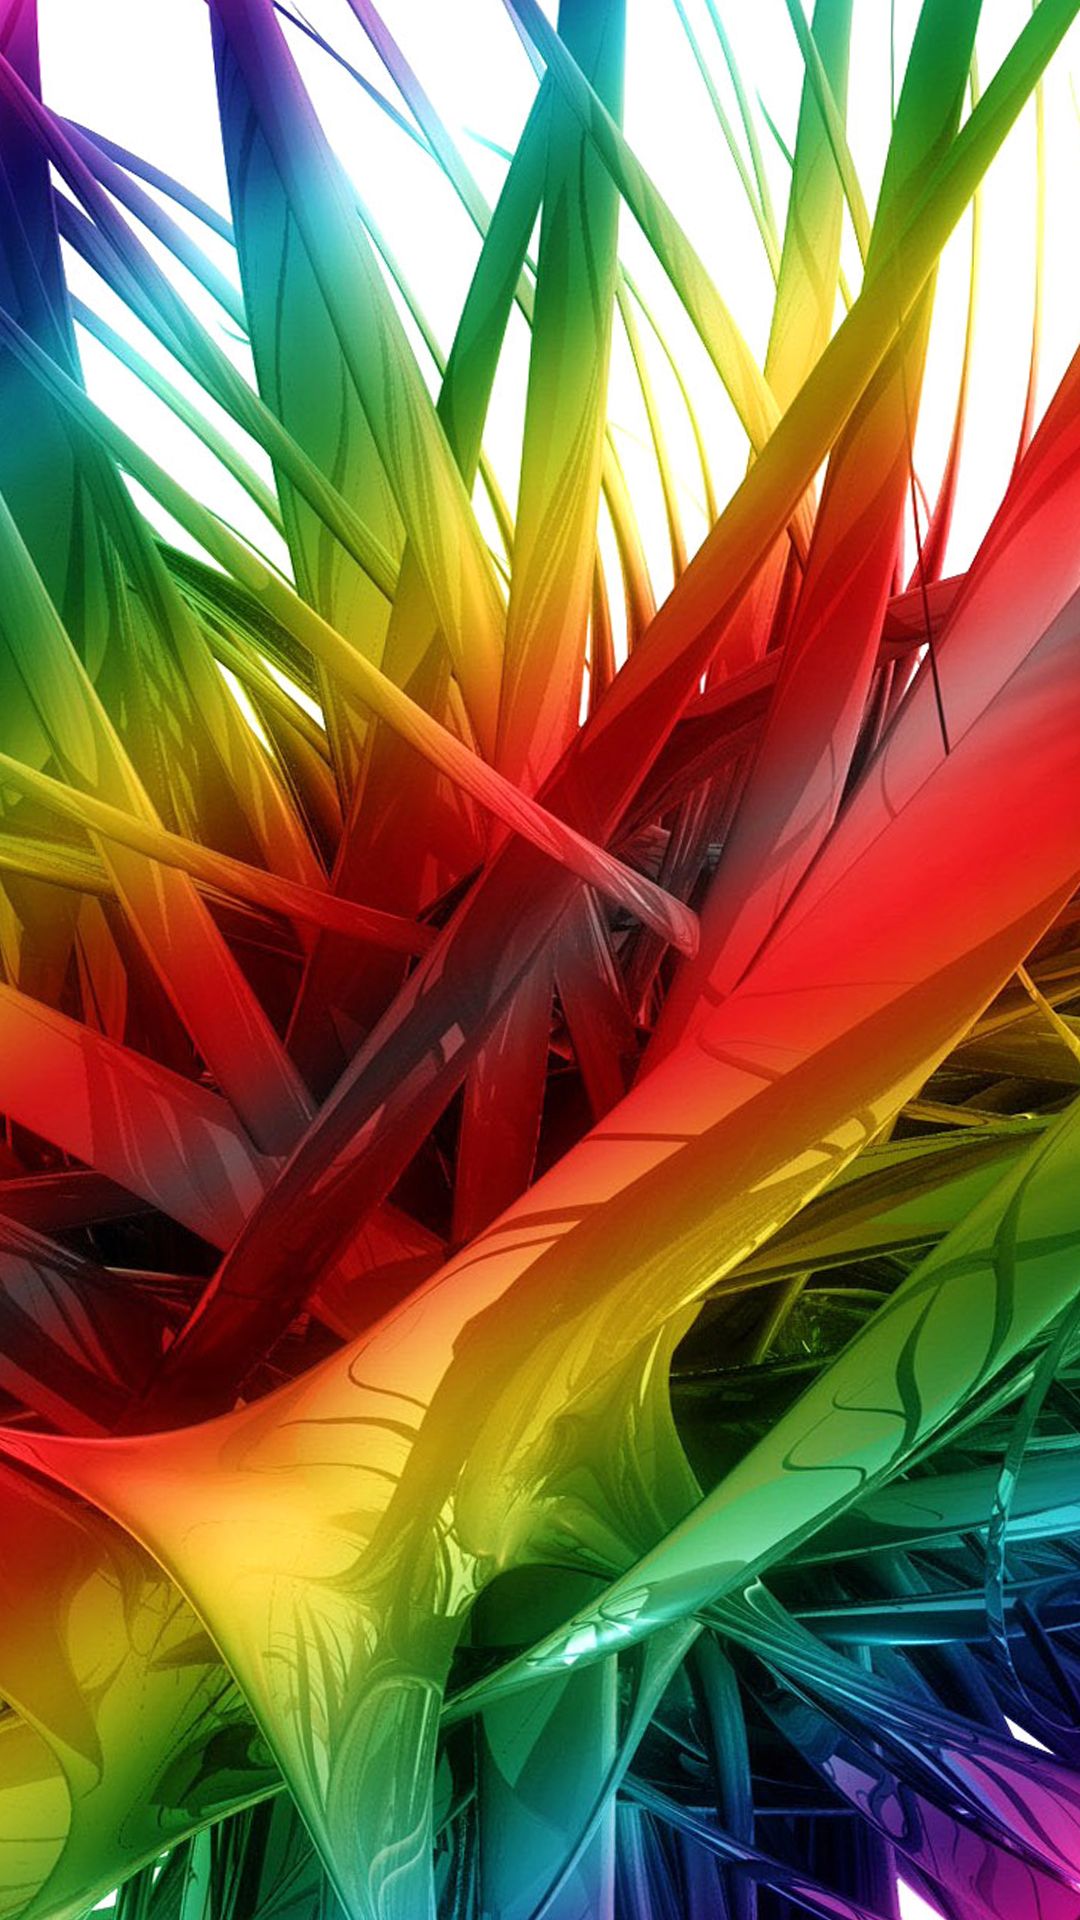 Abstract Colorful Wallpaper For Android Phones With Inch Display